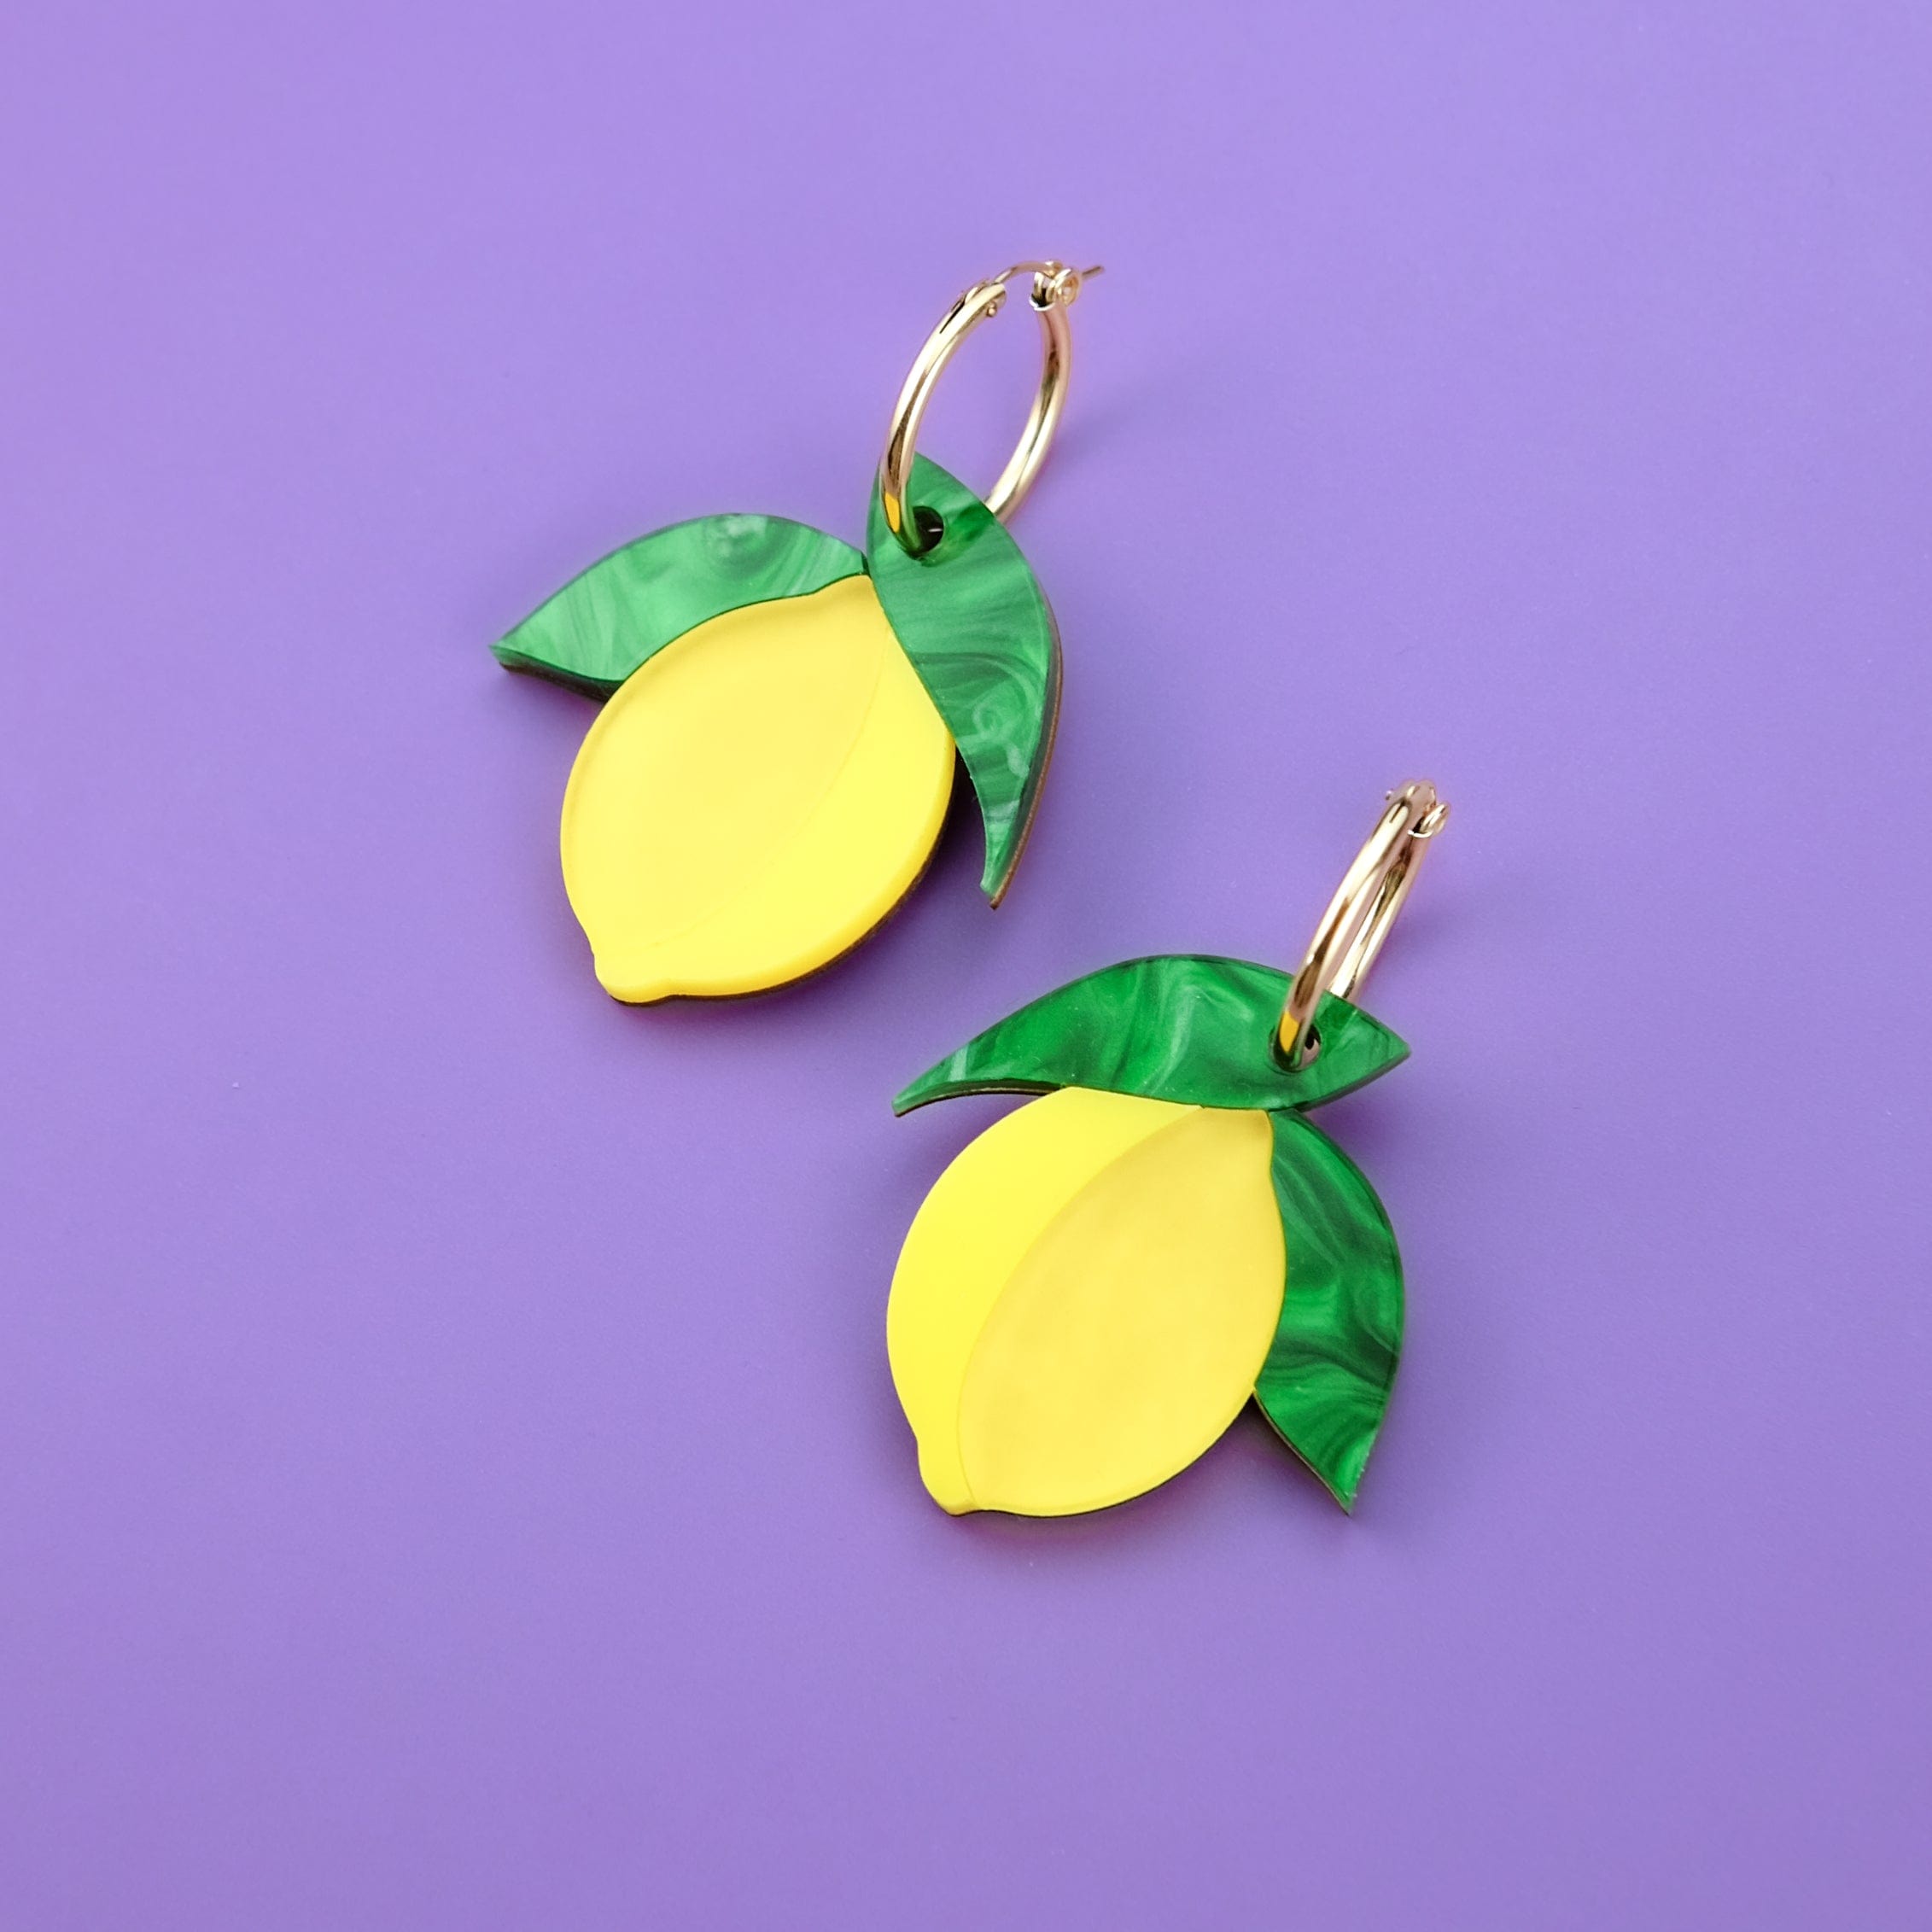 Fun and vibrant Sicilian lemon dangly earrings with gold-filled hoops